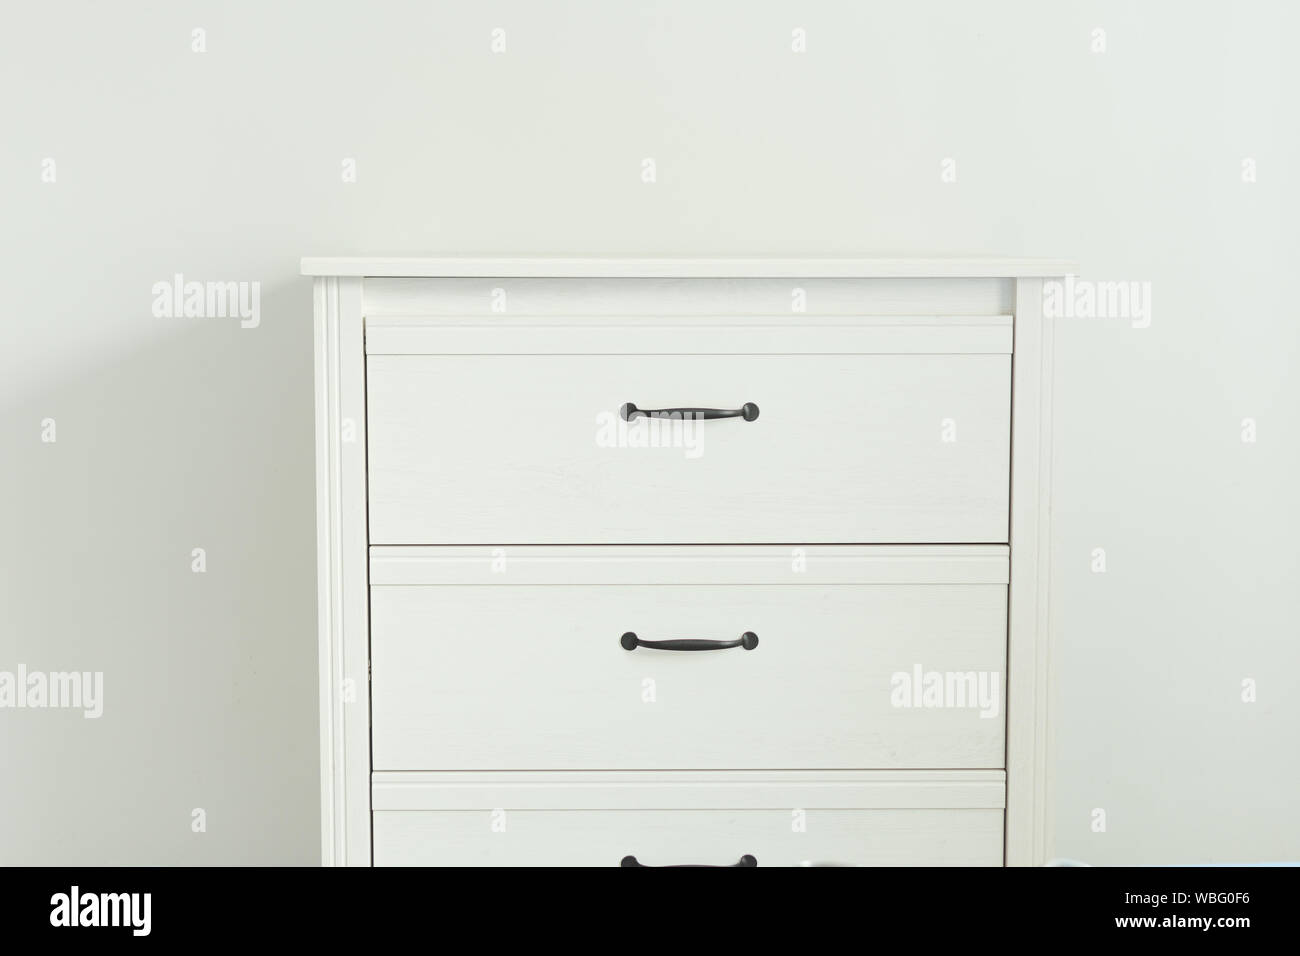 White modern chest of drawers near white wall. Furniture with drawers in a frame. Stock Photo